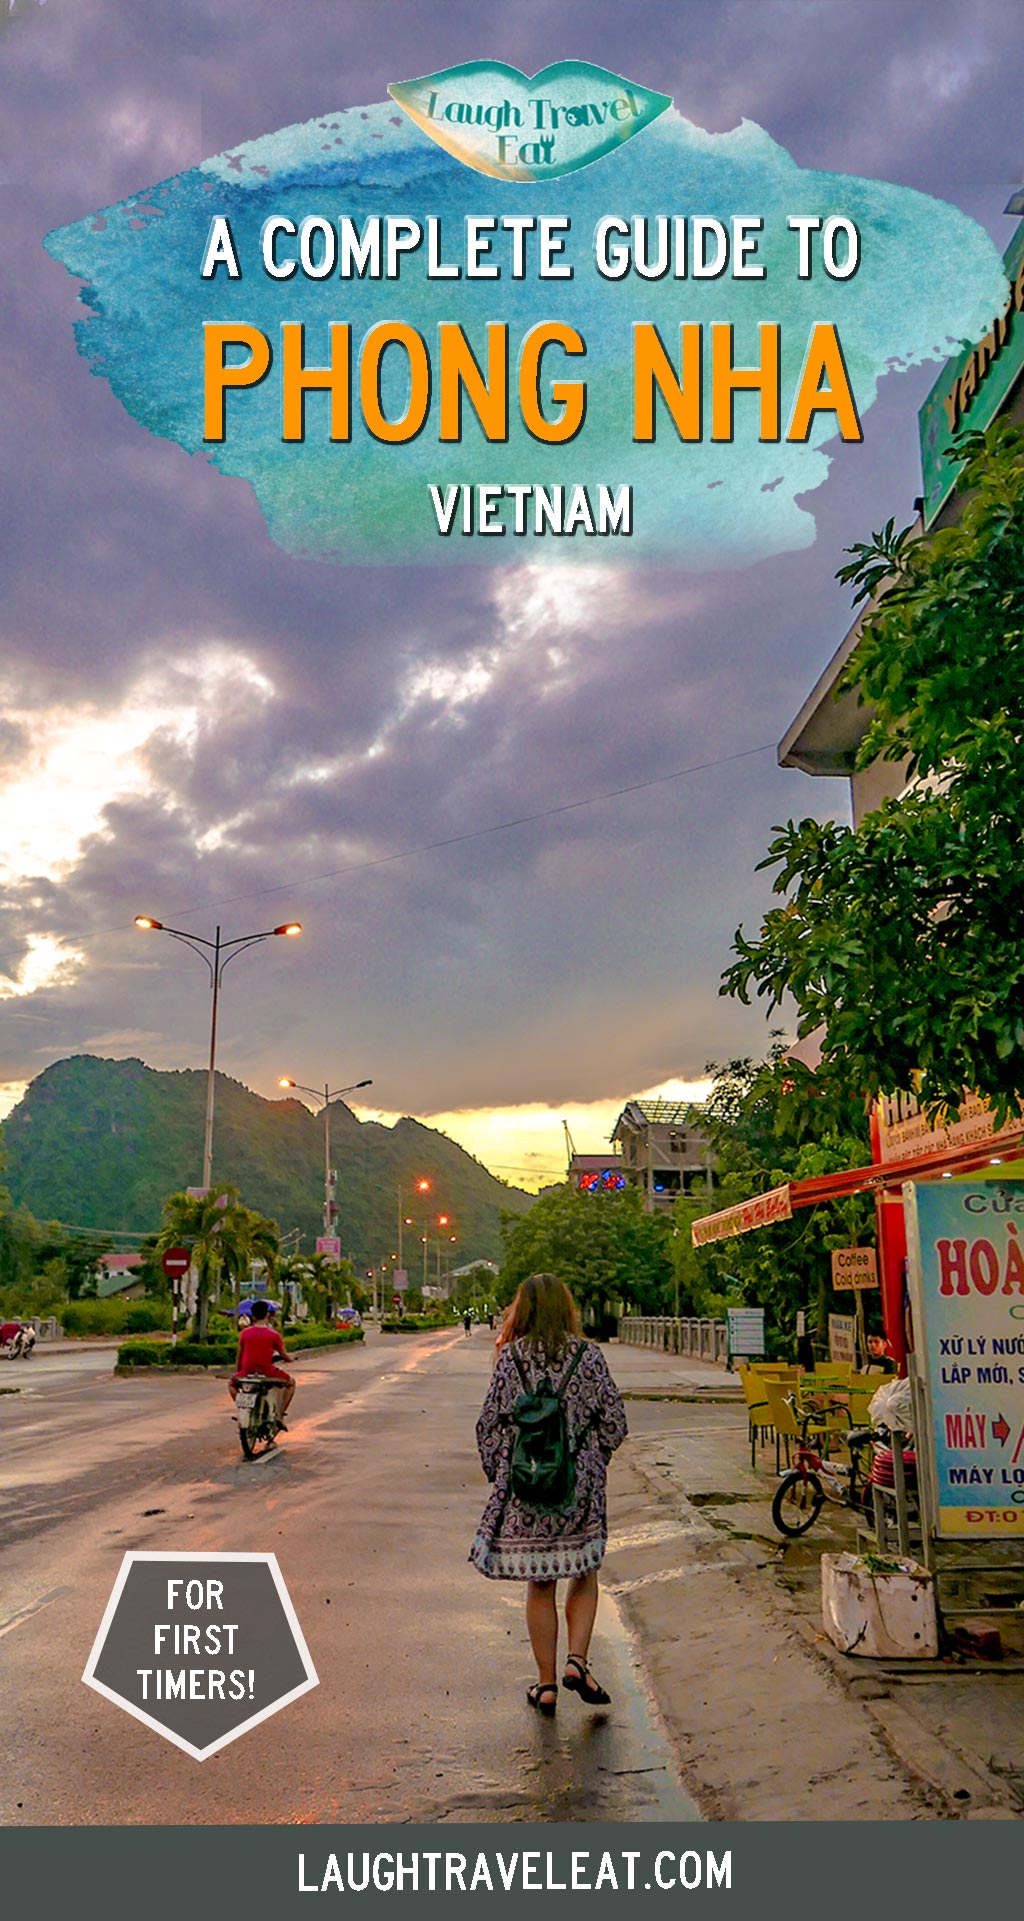 Phong Nha is a small town in north central Vietnam with one of the best cave structures in the world. Here's where to stay, what to eat, and how to visit these amazing caves #PhongNha #Vietnam